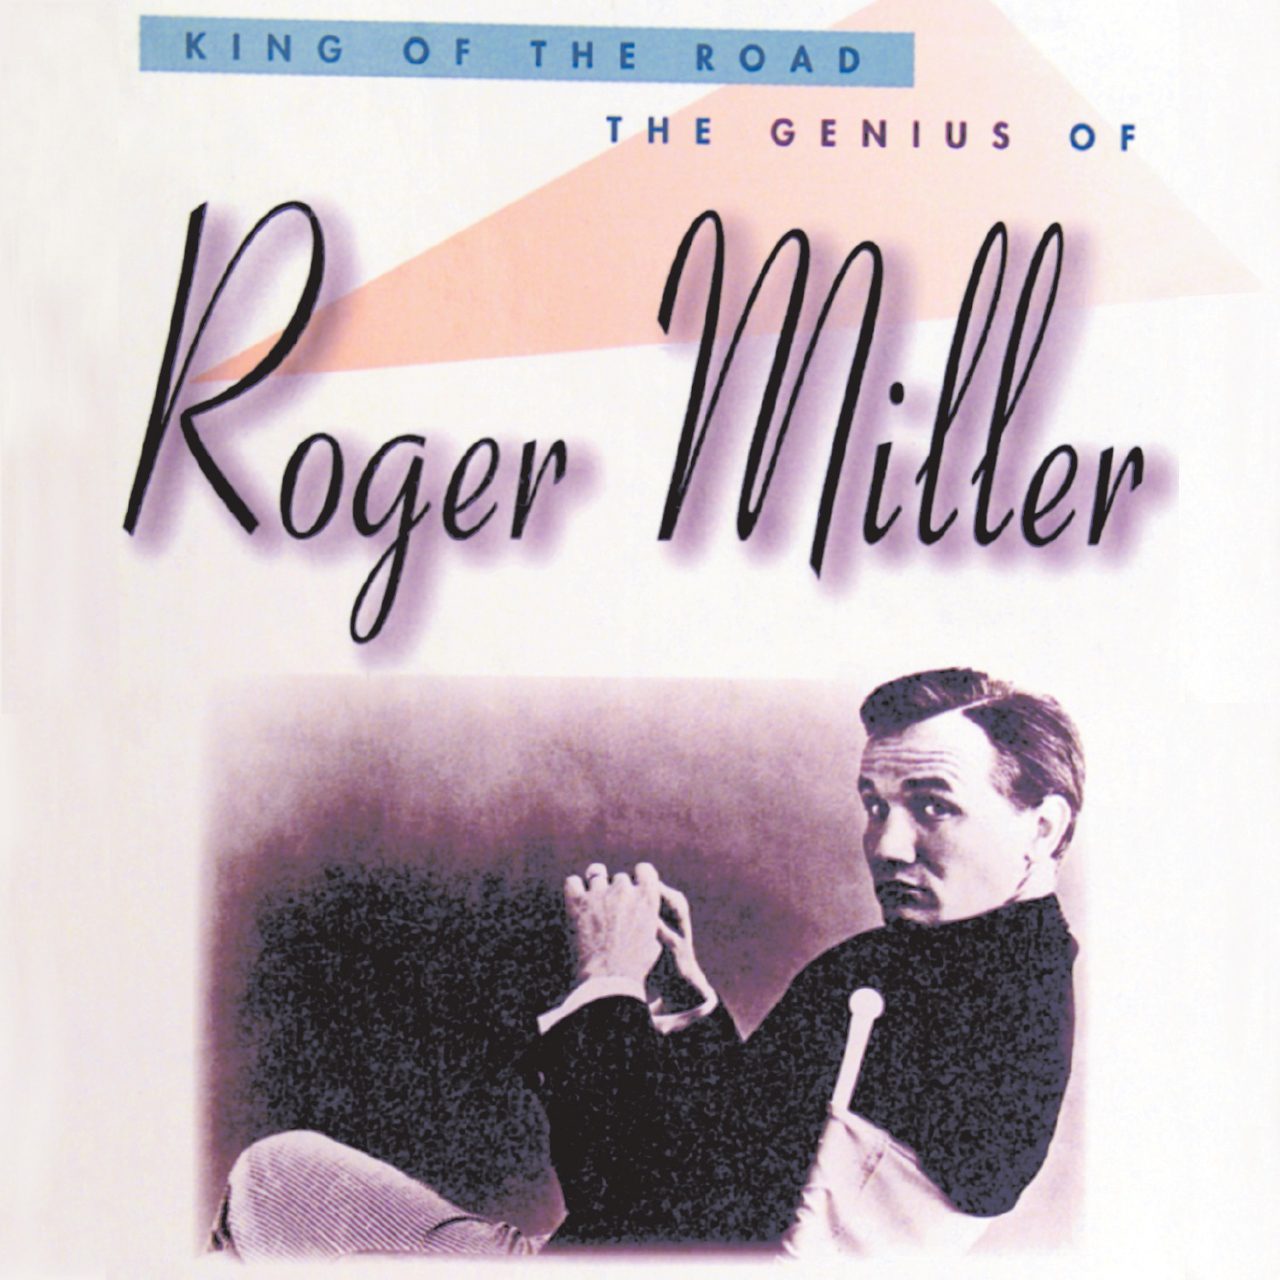 Roger Miller – King Of The Road. The Genius Of cover album